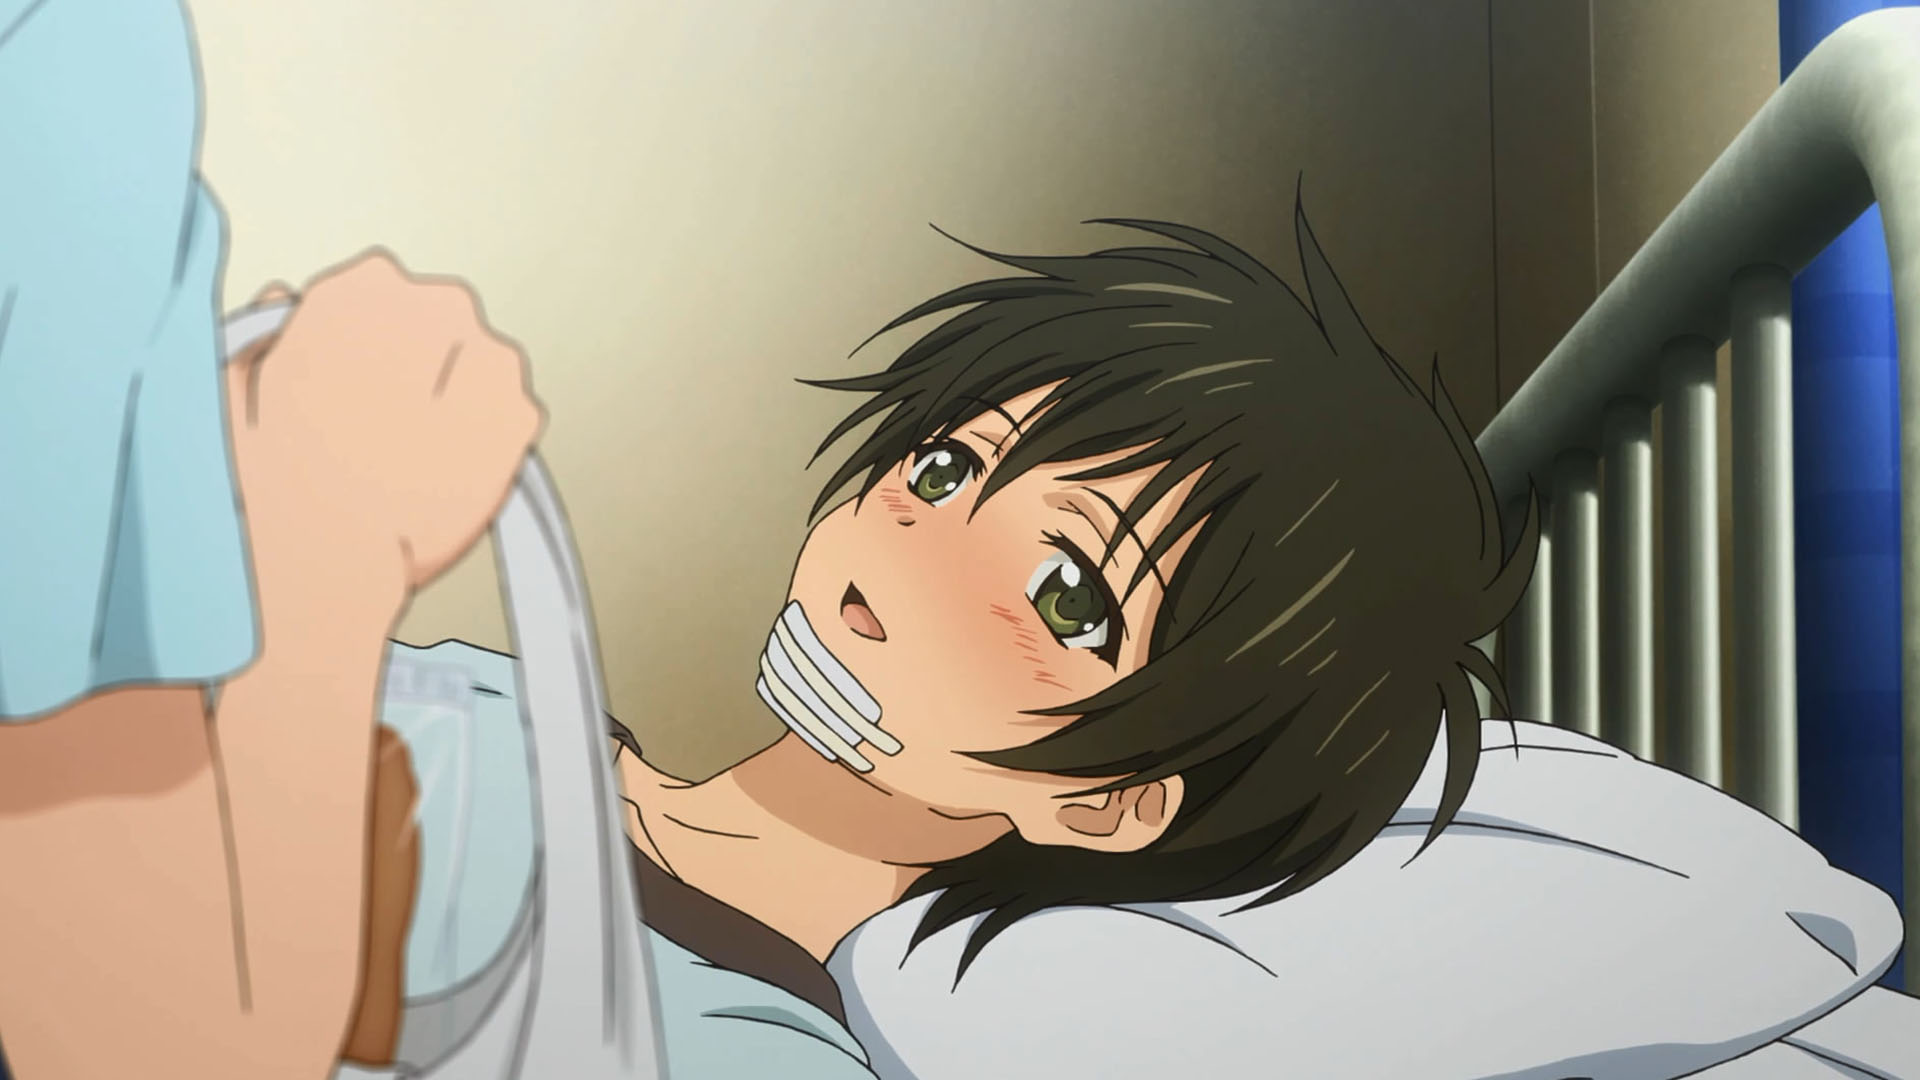 Golden Time Anime: How did Banri lose his memories?